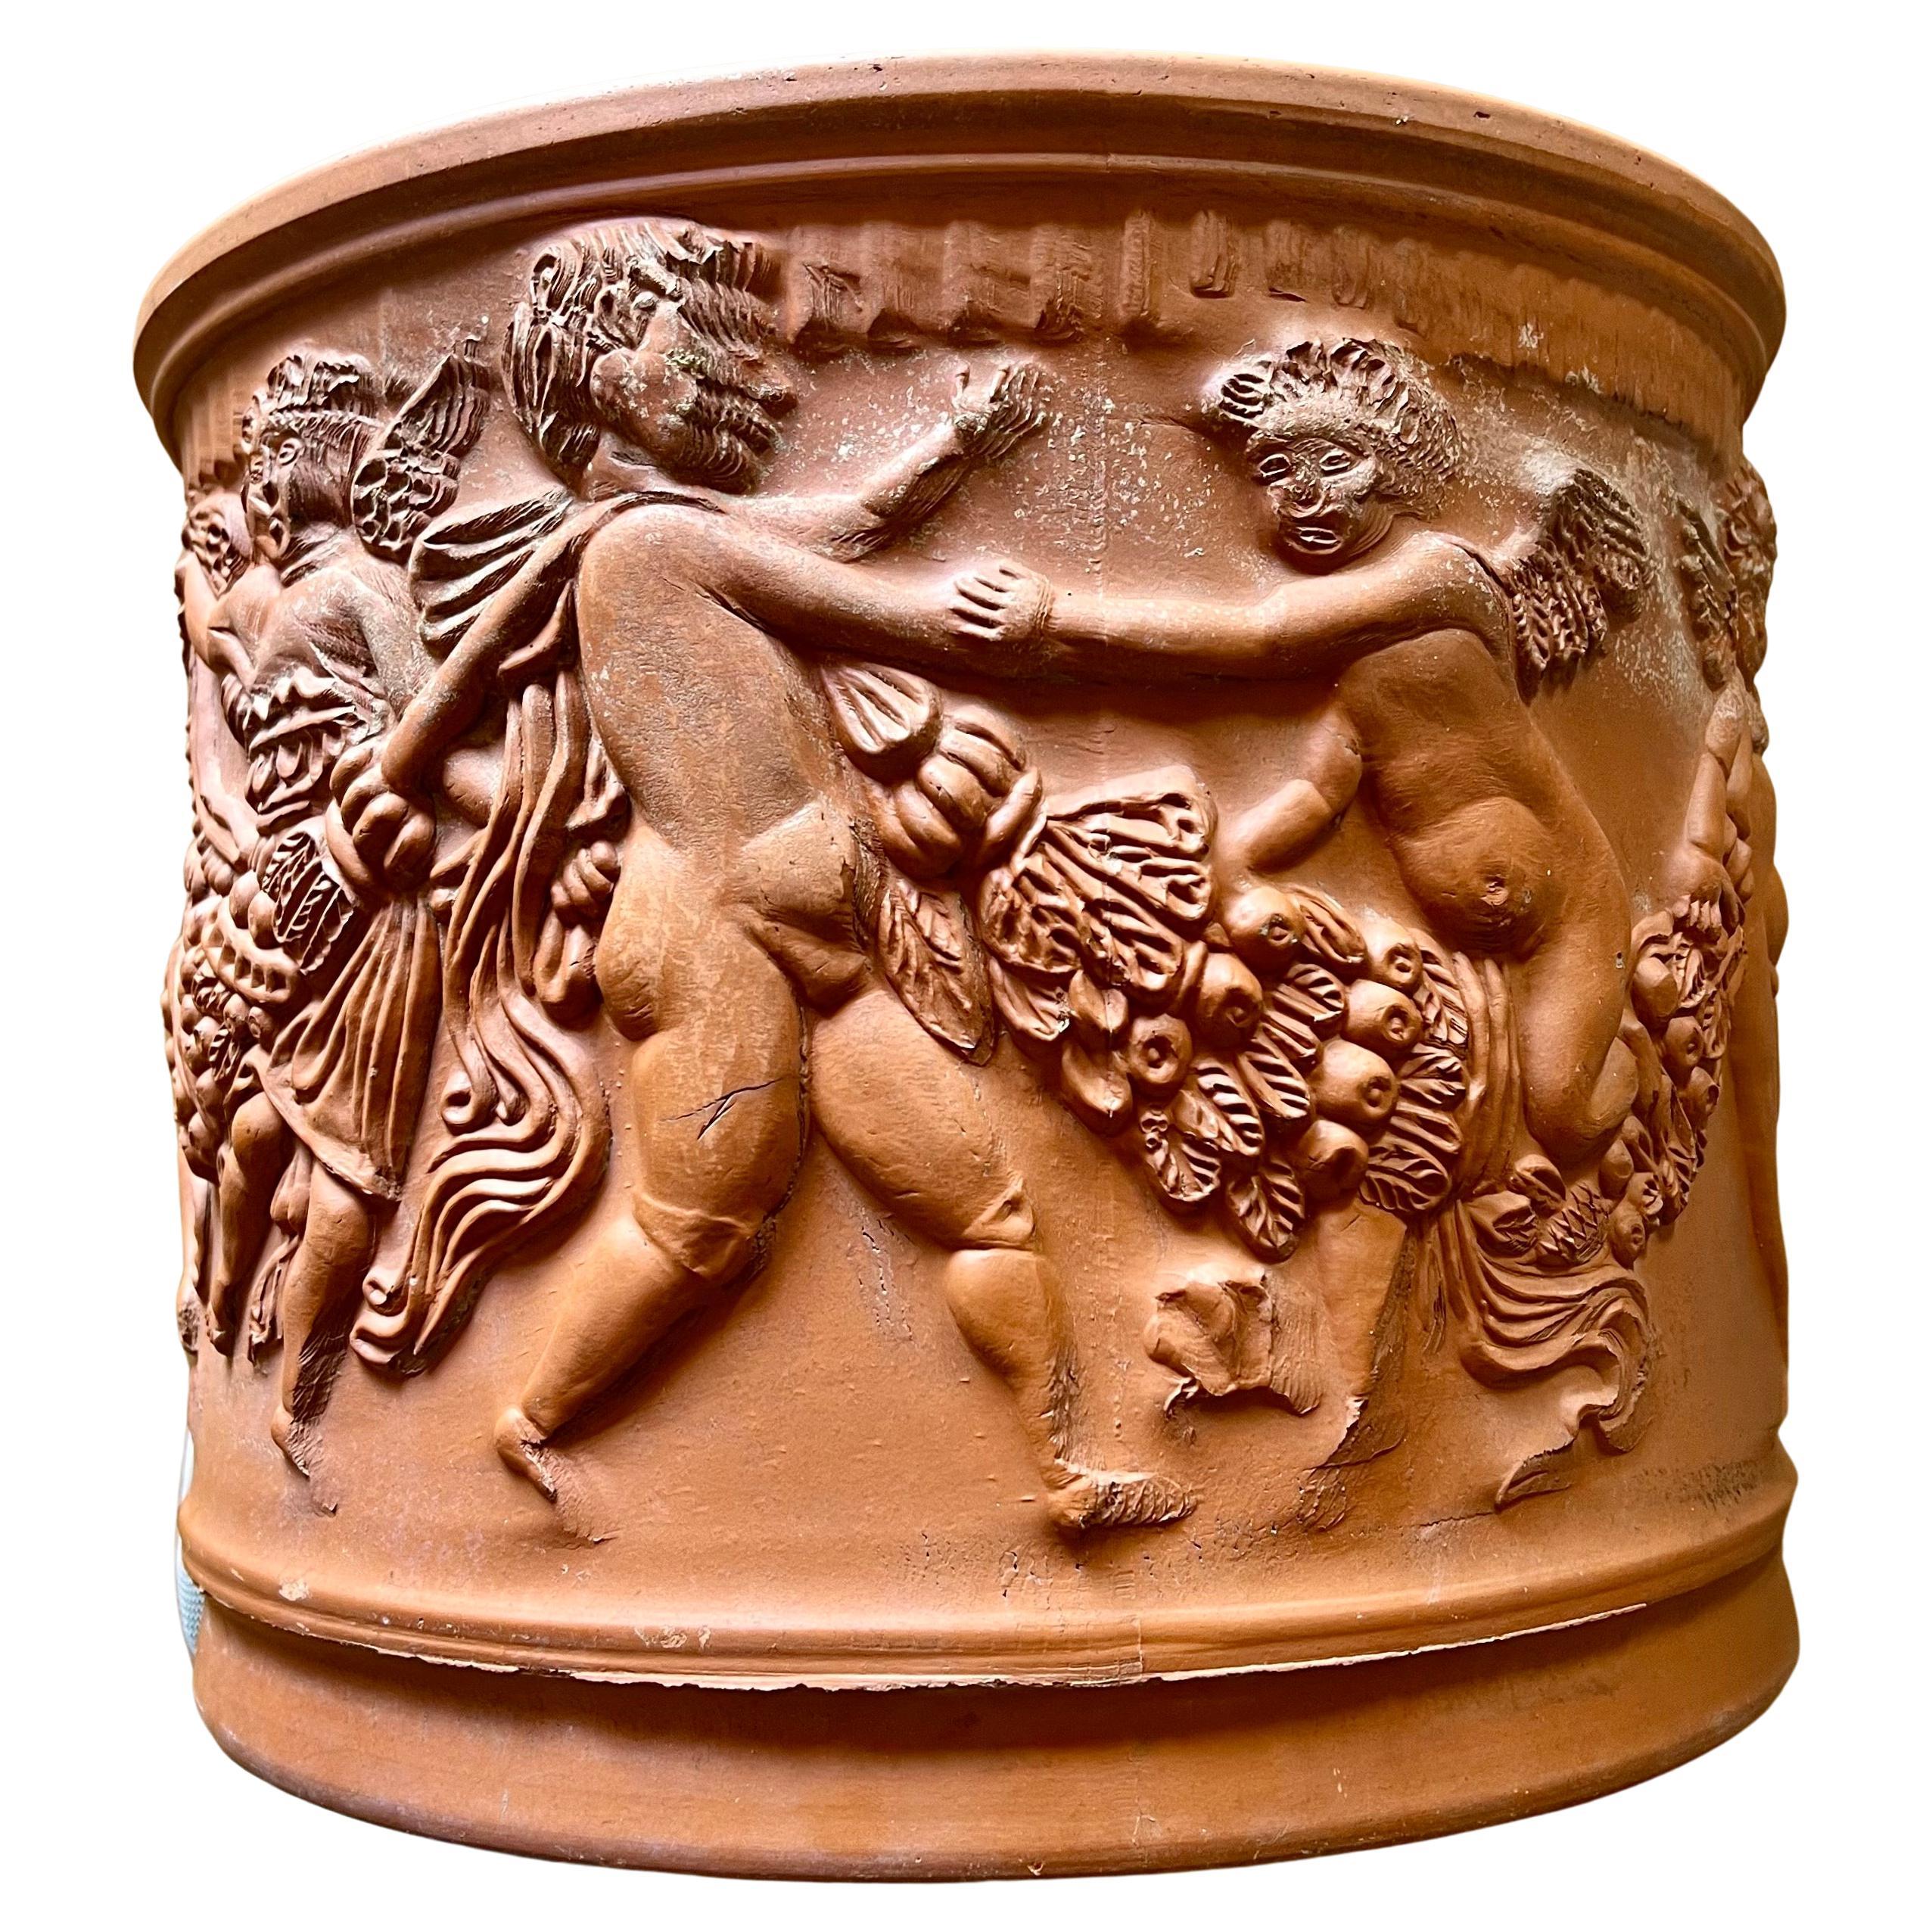 Large Italian Bitossi red terracotta Cherub Putti garden planter flower pot. Item features decorated with frieze of dancing putti carrying fruity festoons, marked with Bitossi manufacturing impression